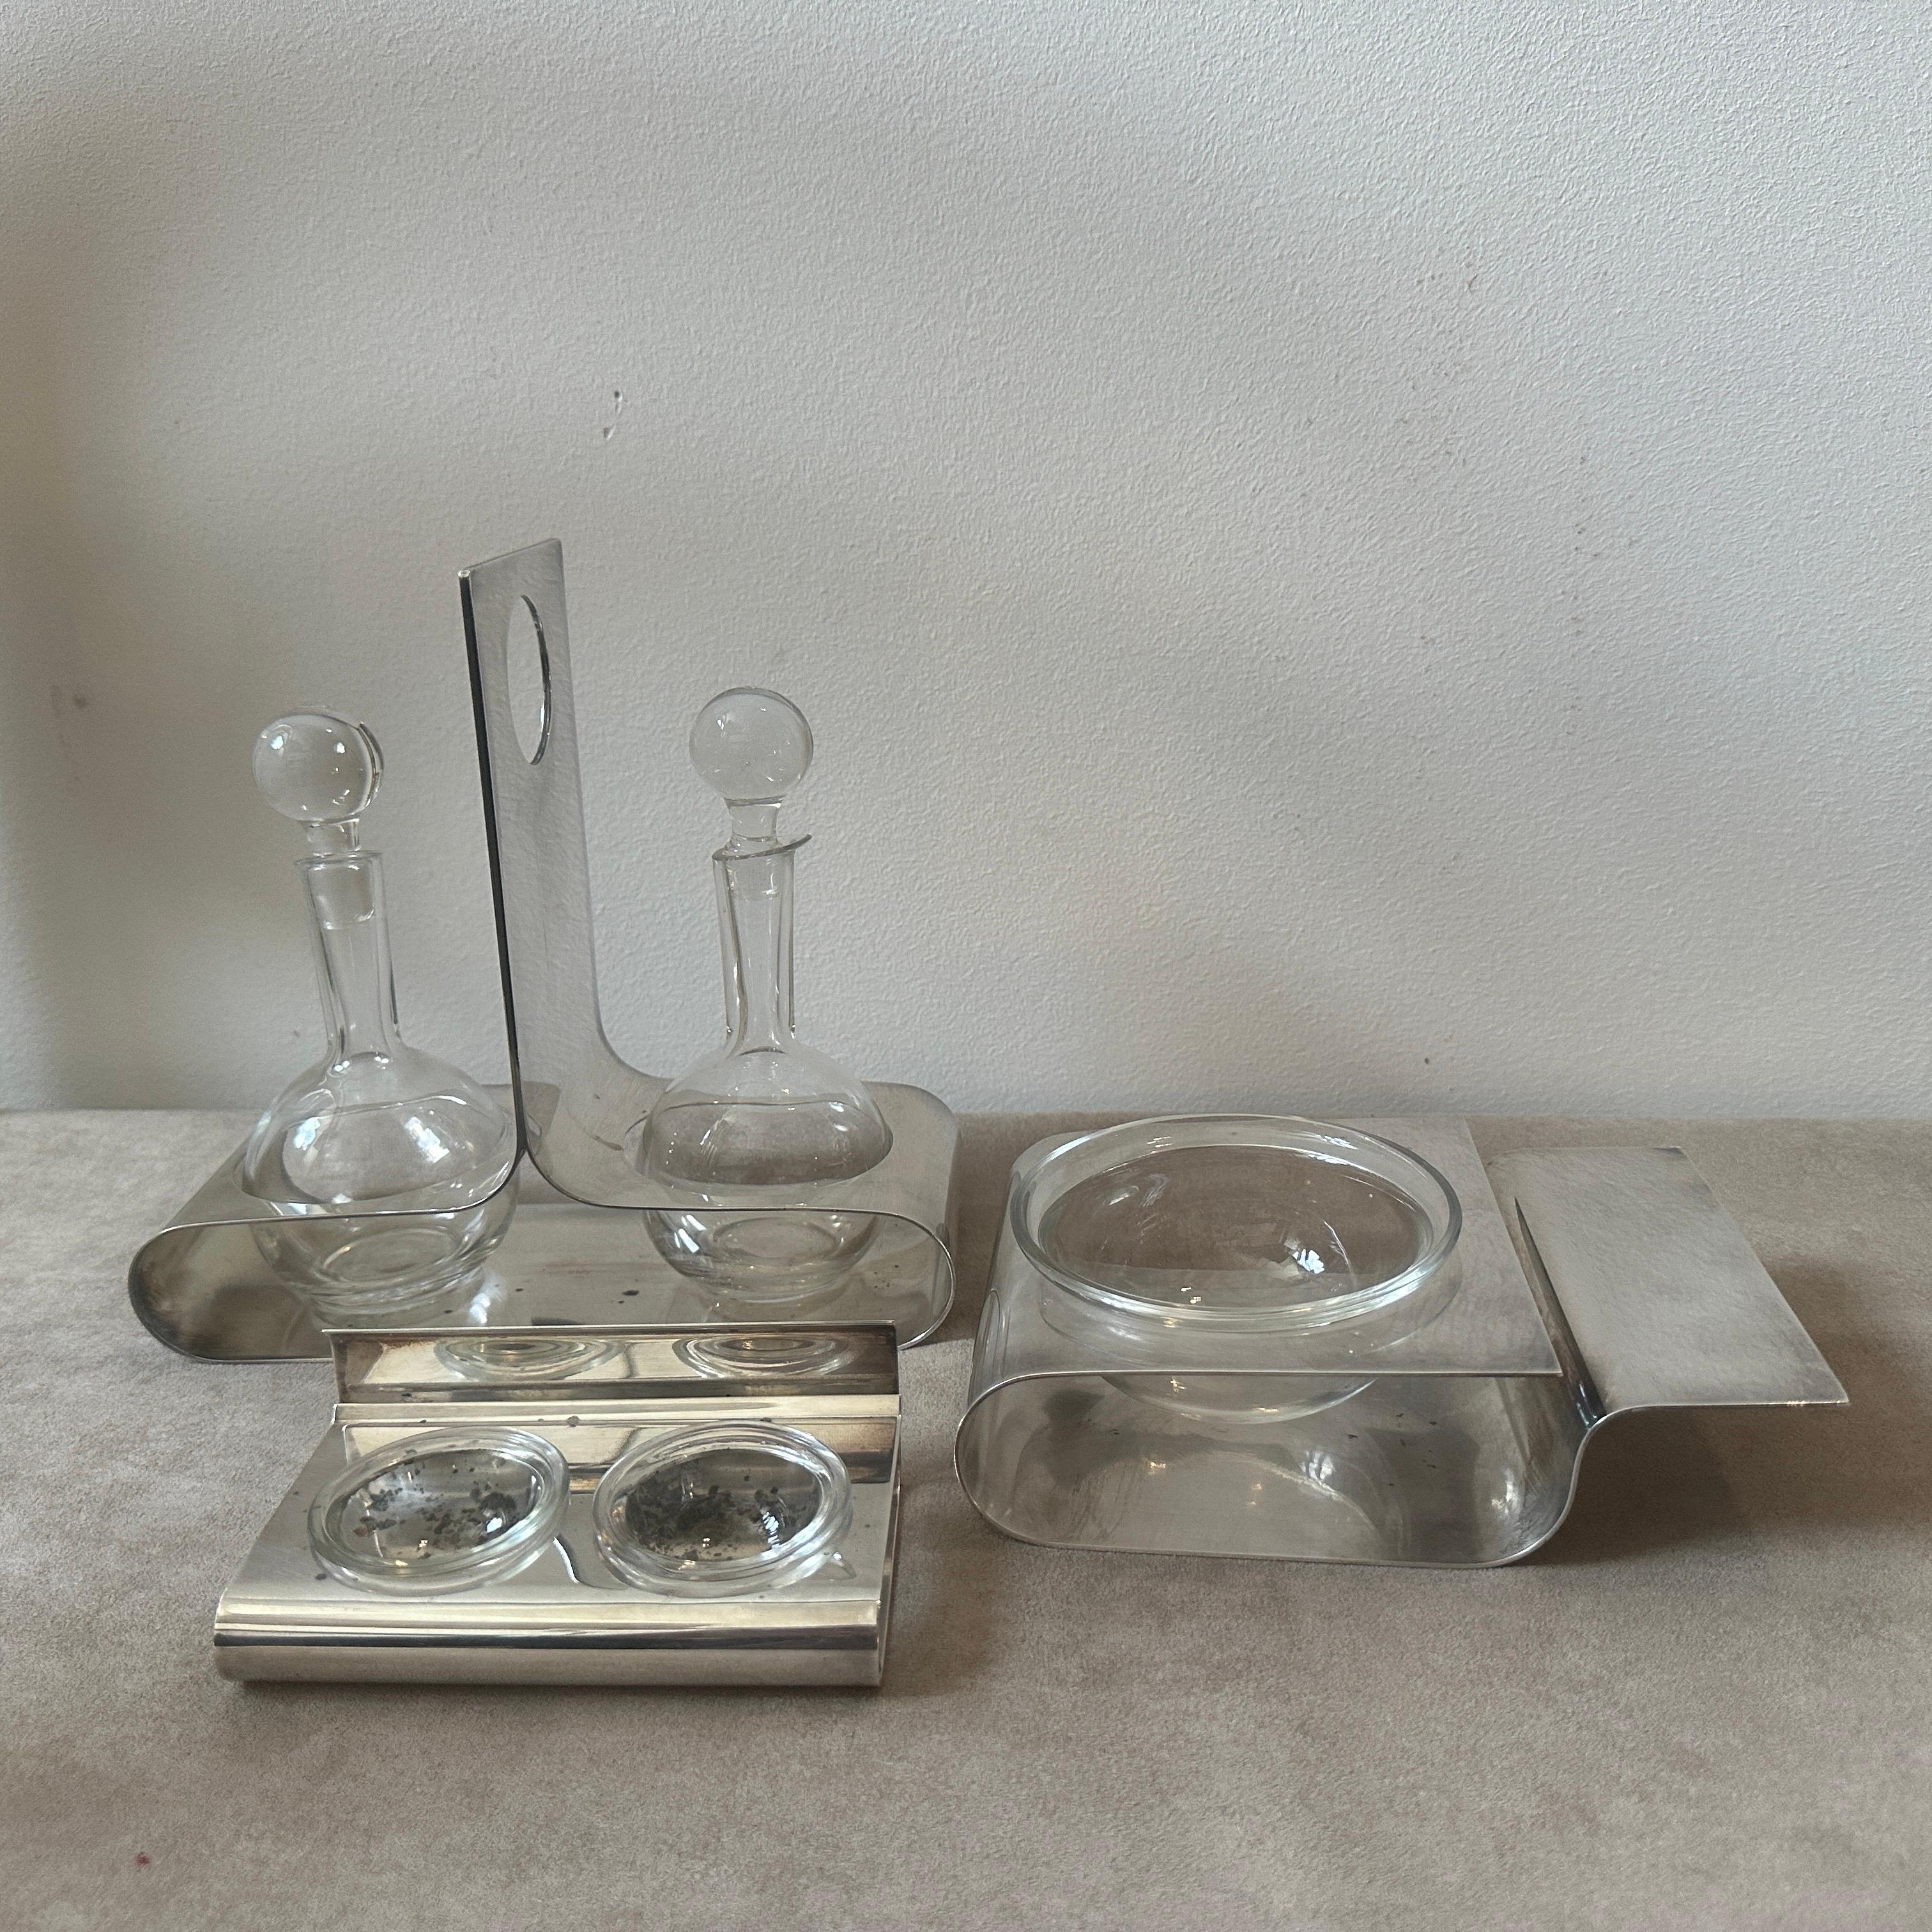 Three 1980s Modernist Silver Plated and Glass Serving Pieces by Lino Sabattini For Sale 3